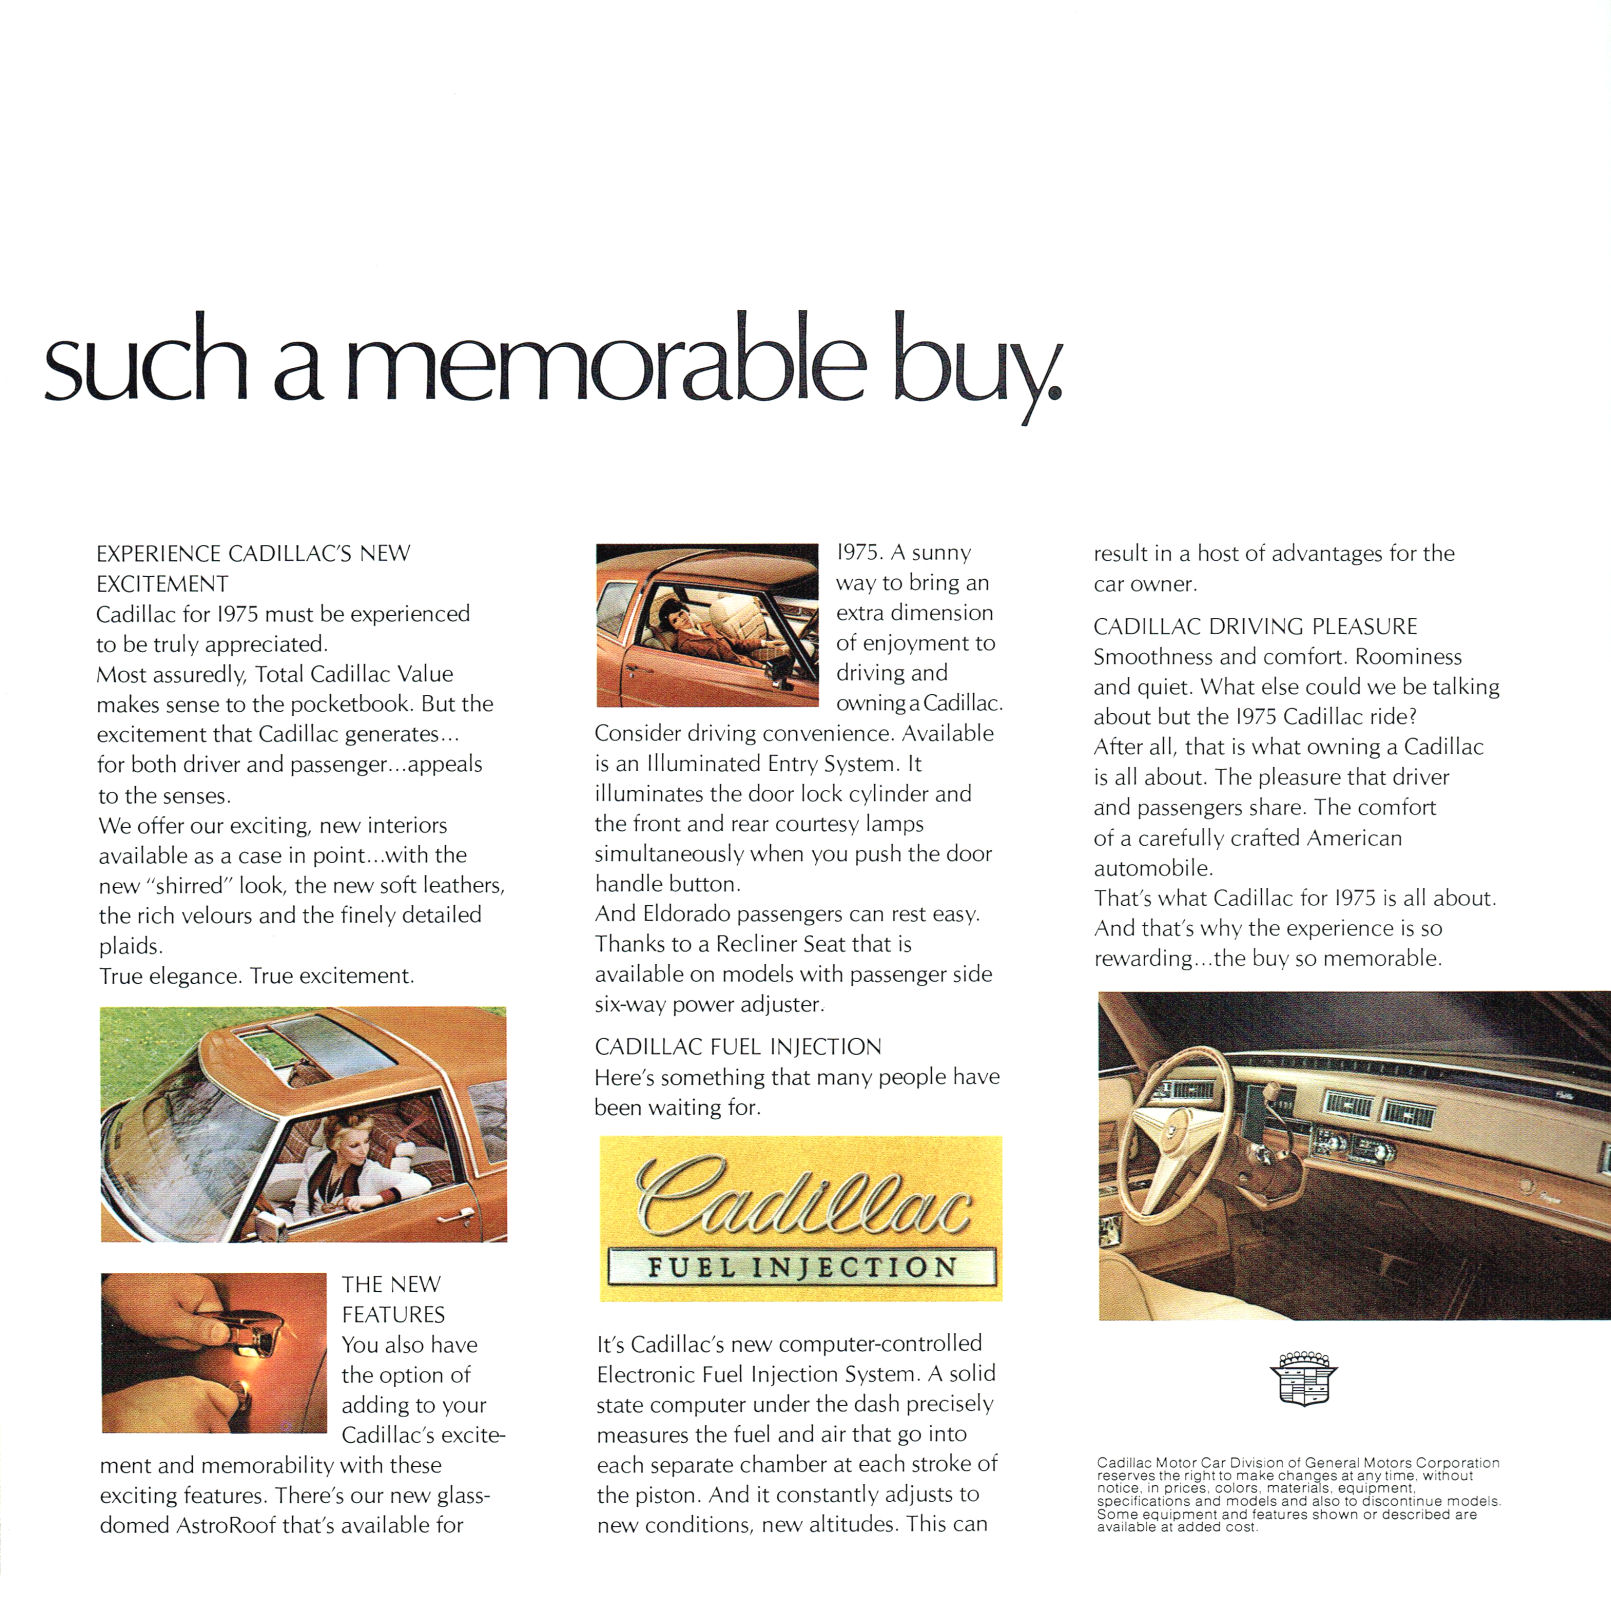 1975 Cadillac Remember Mailer (TP).pdf-2023-12-13 19.27.40_Page_6